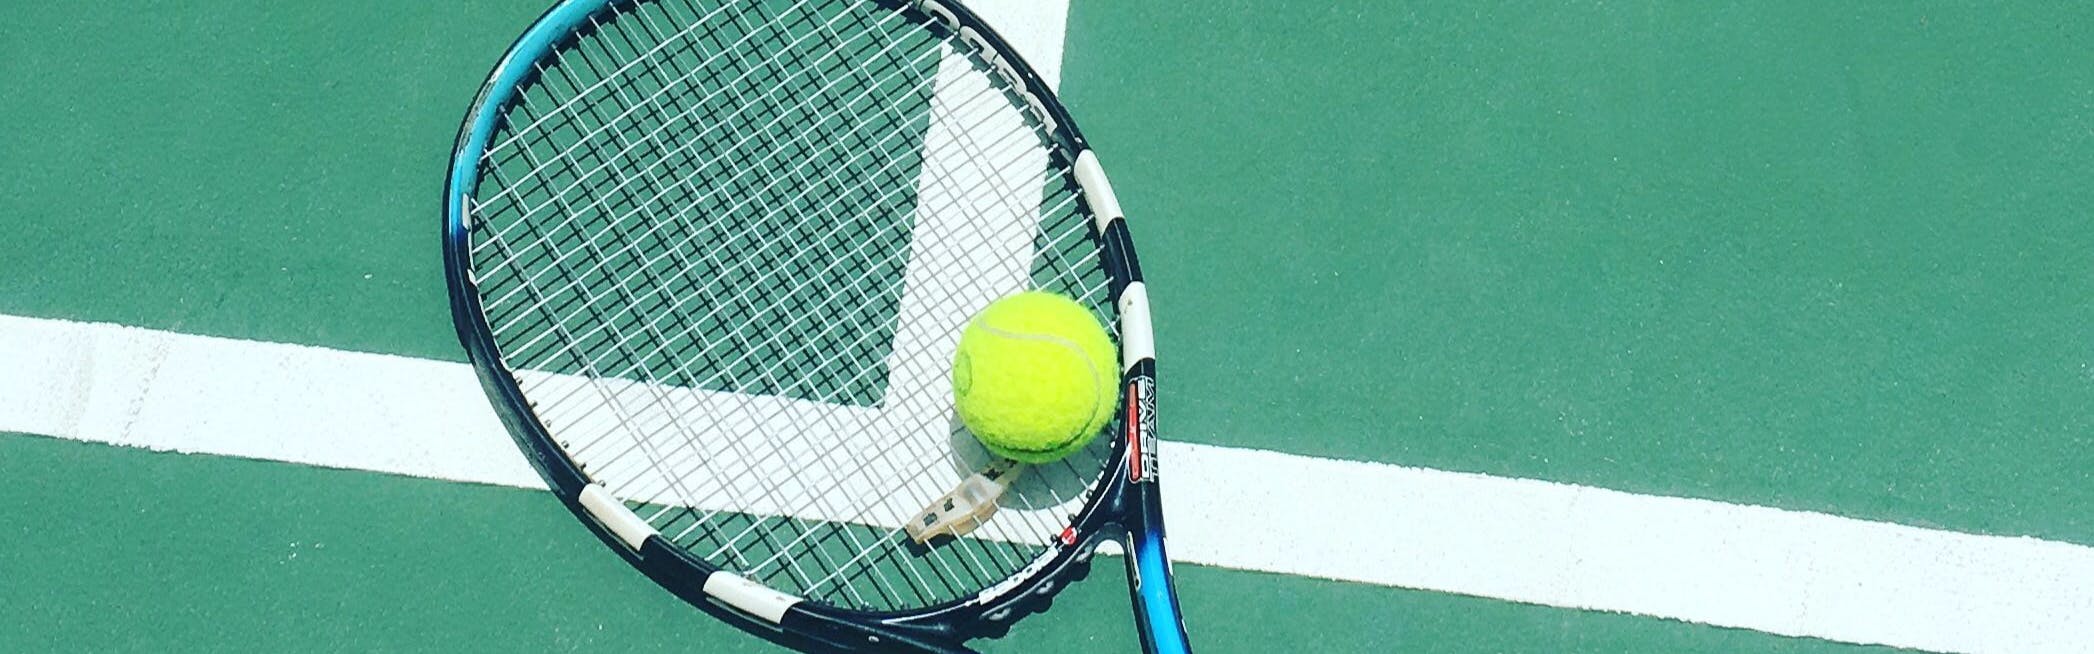 A tennis racquet with a tennis ball laying on a tennis court